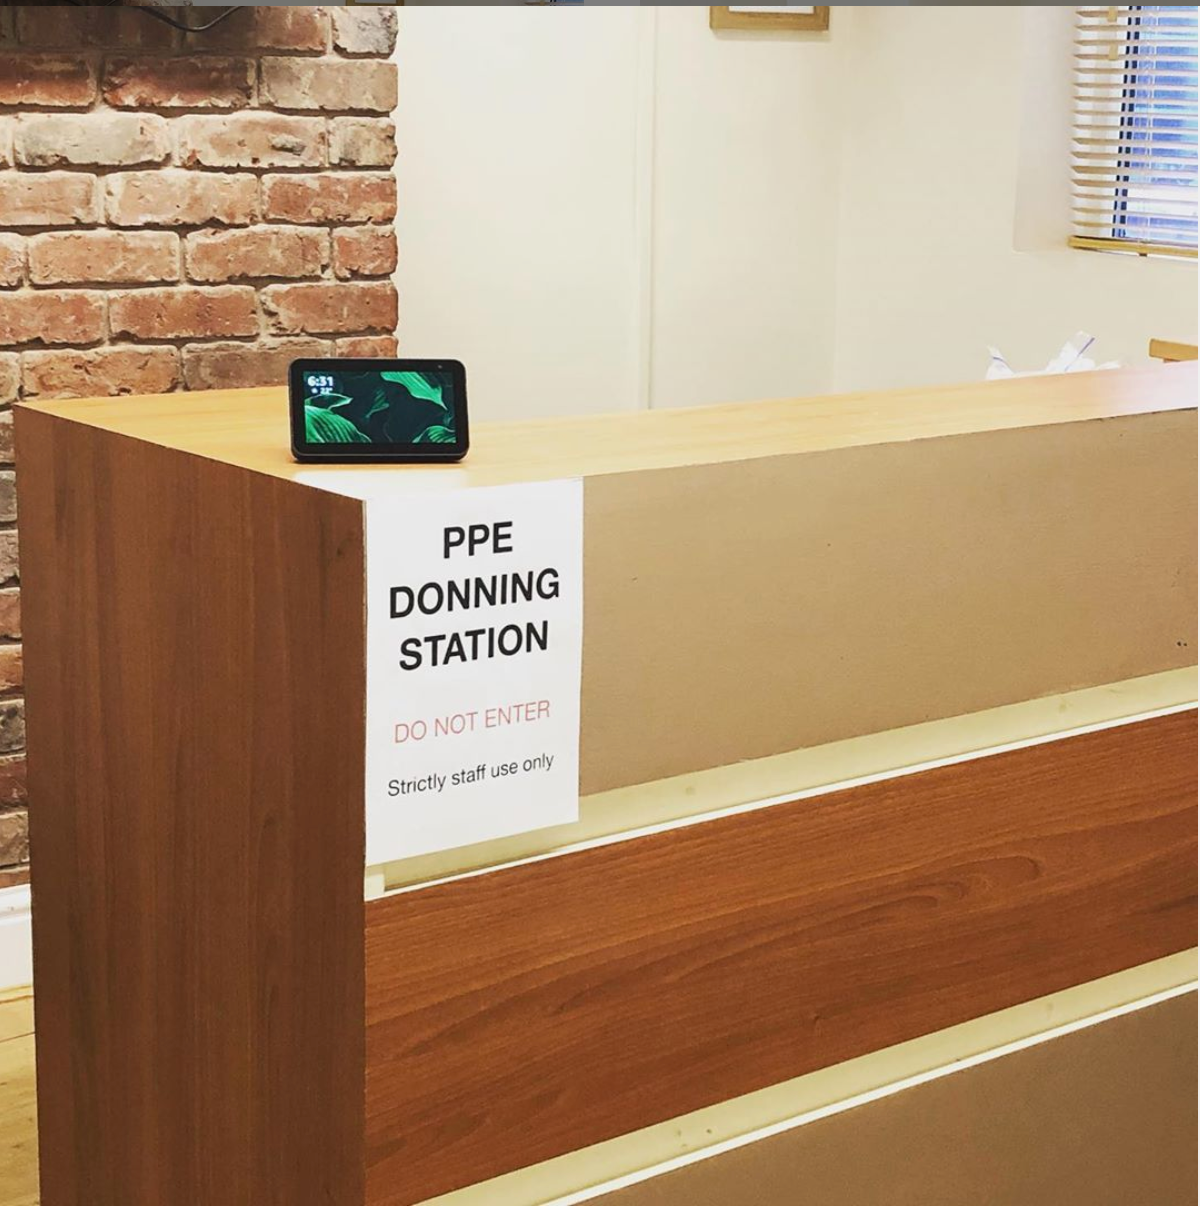 A photo of the PPE donning station at The Village Osteopaths, with a sign advising patients not to enter and a video device so Sean can carry out reception duties remotely